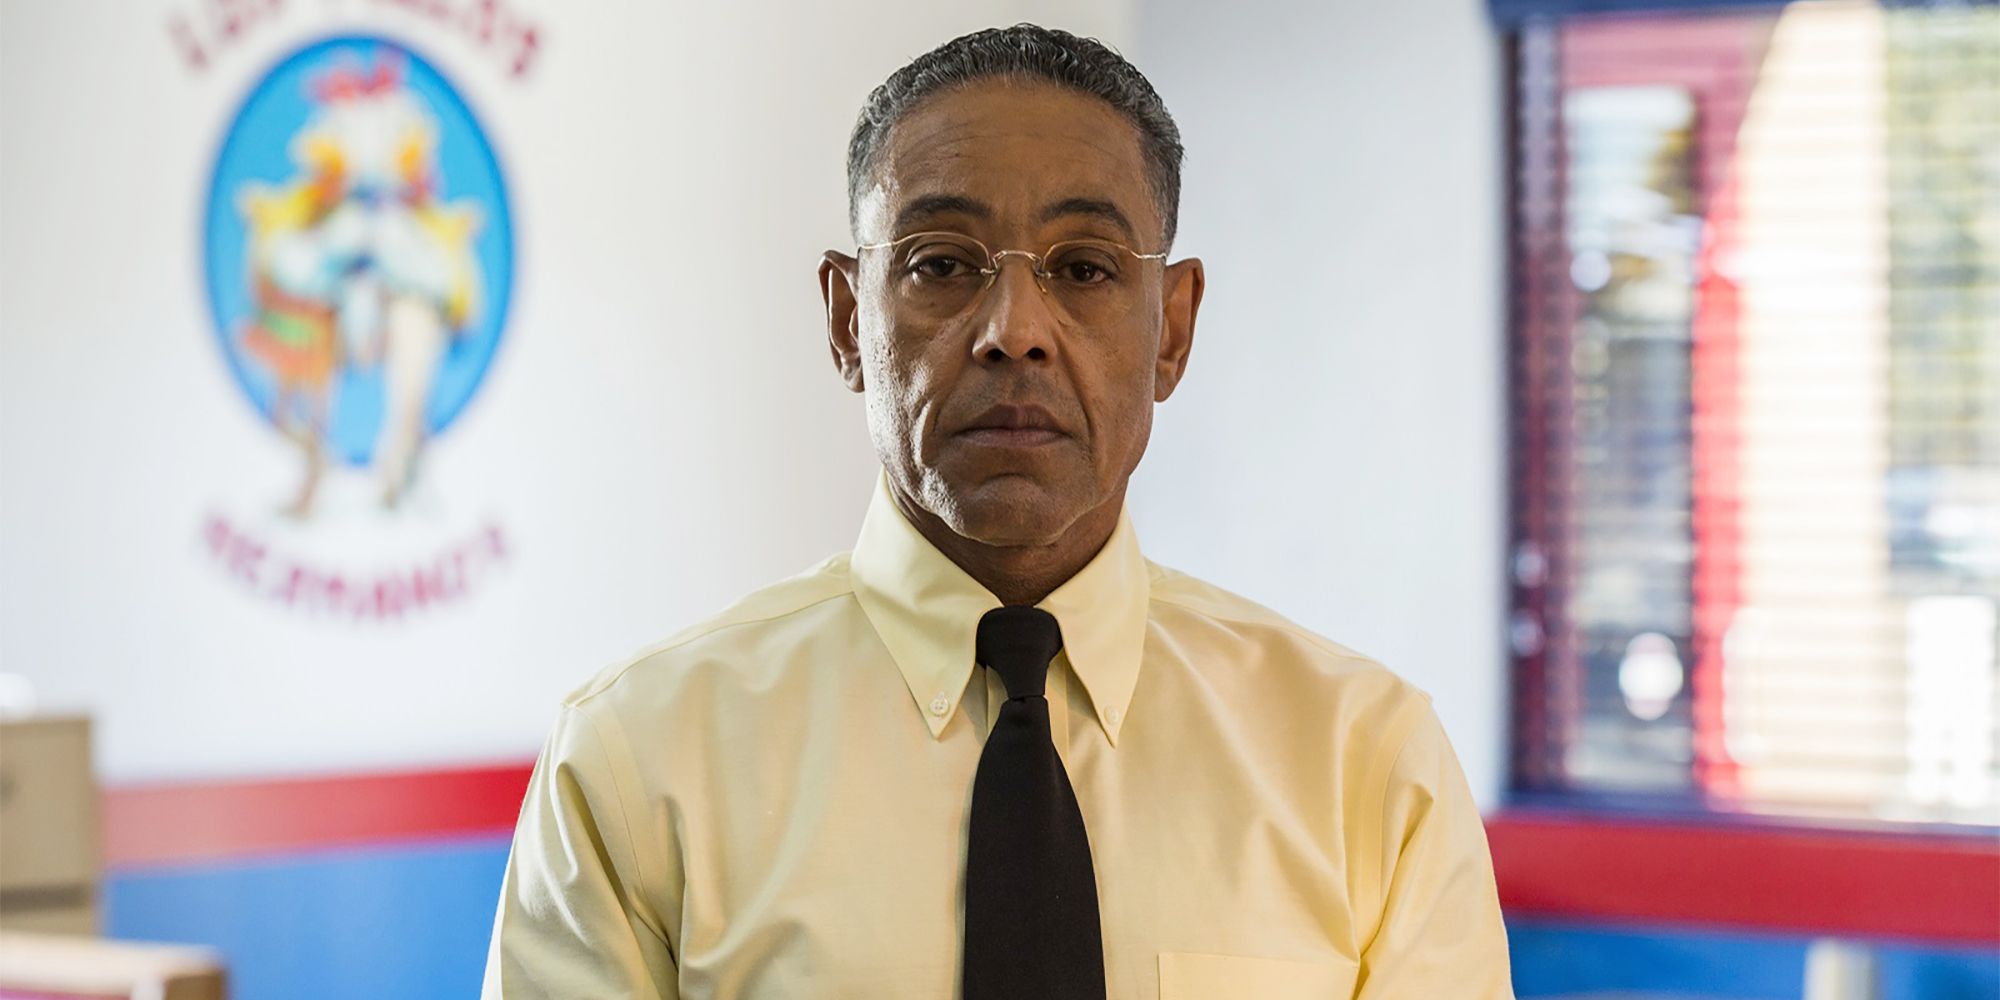 Giancarlo Esposito is Gus Fring in Better Call Saul, a Breaking Bad prequel